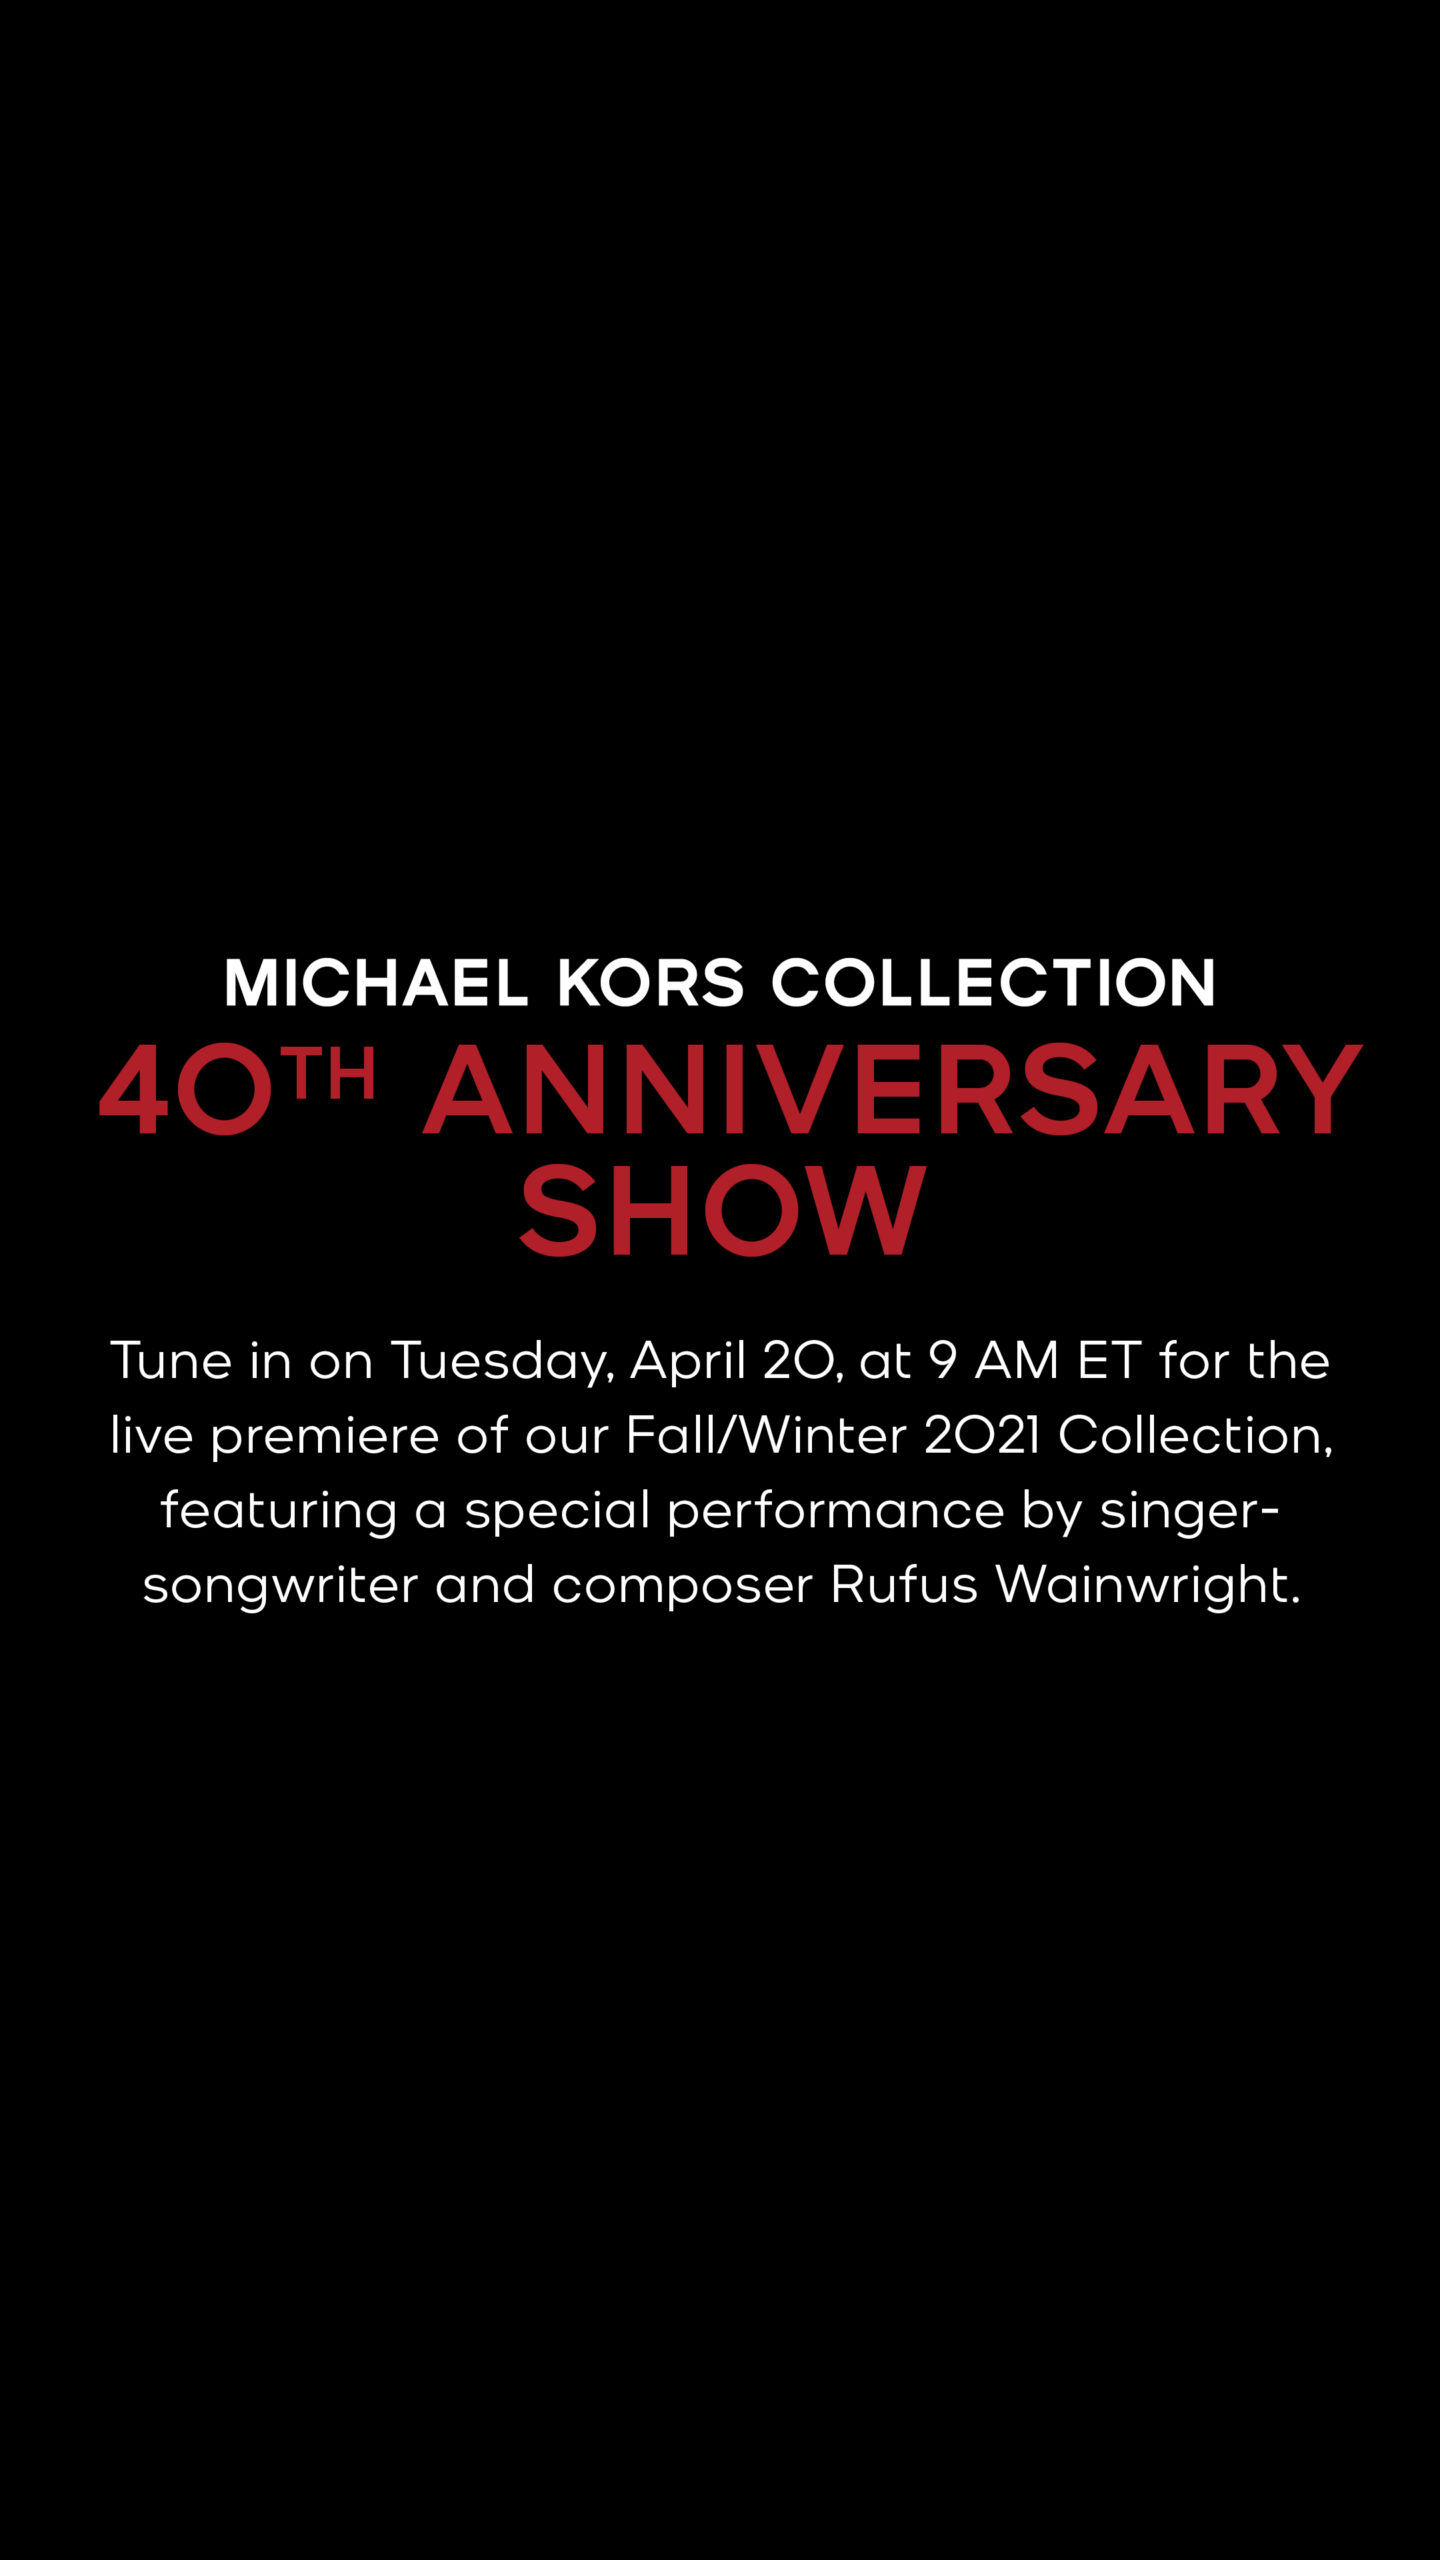 Michael Kors Continues the 40th Anniversary Celebrations Out East